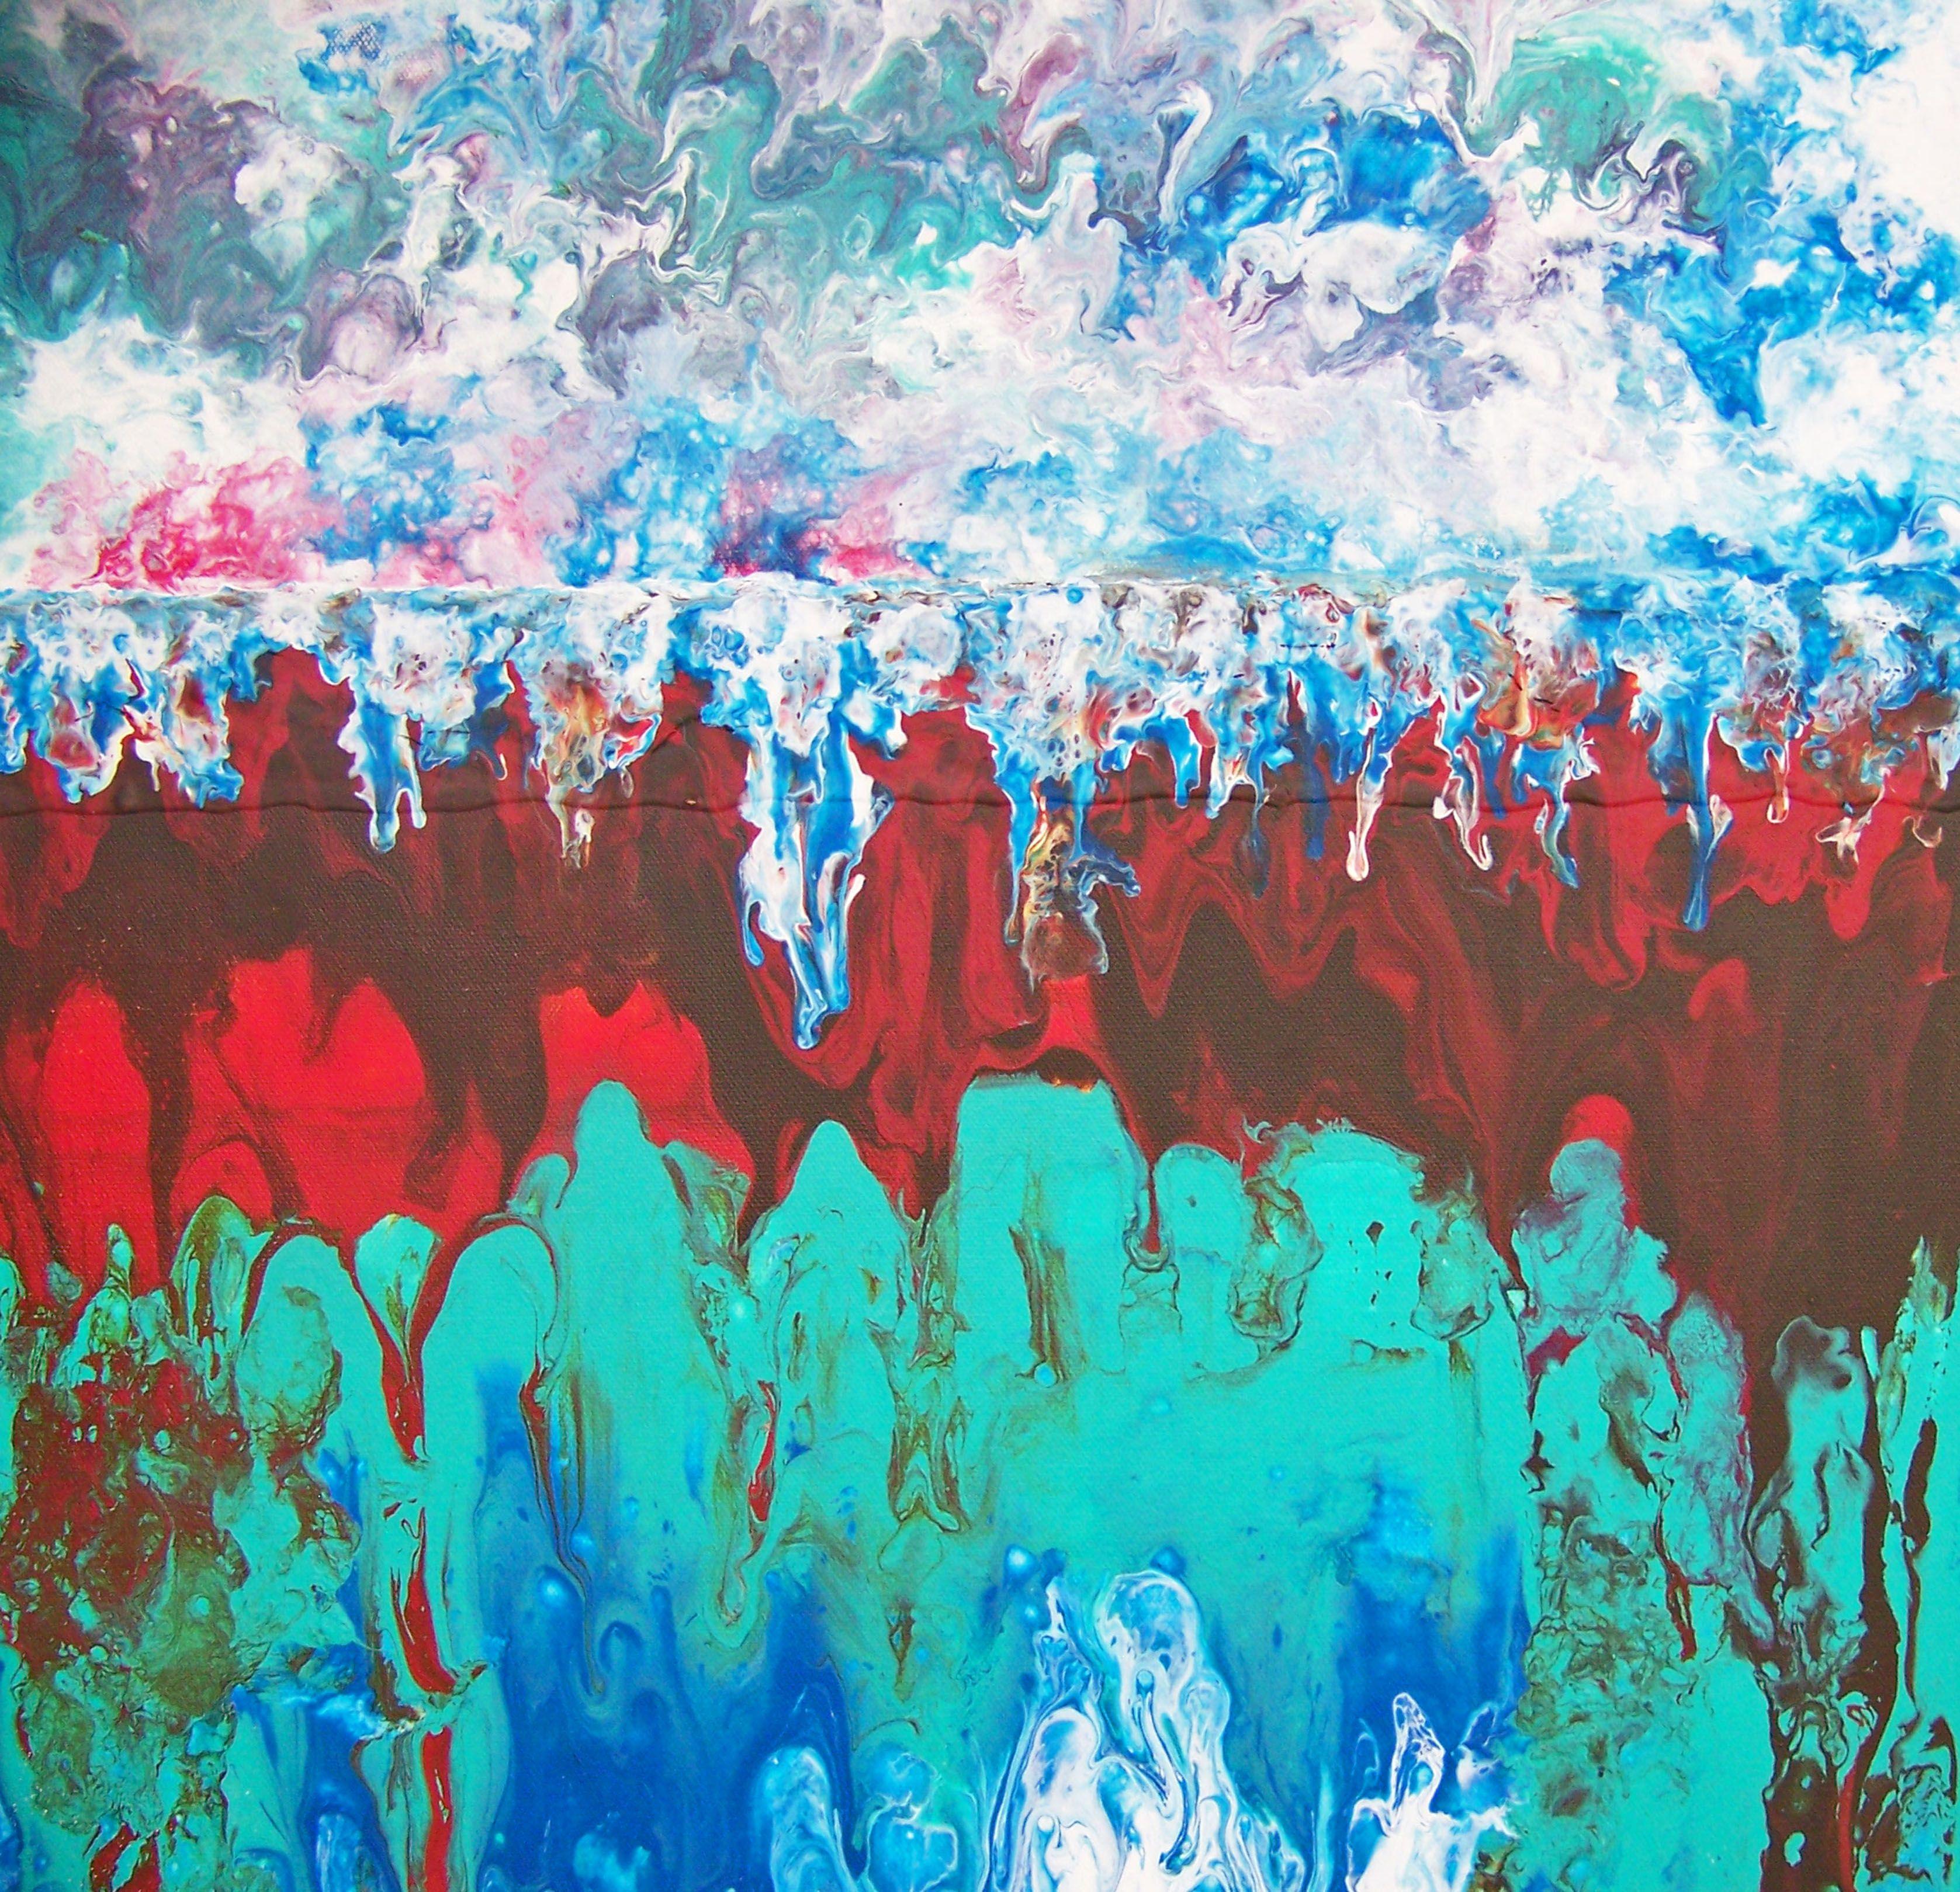 Abstract Painting Jo Moore - Incroyable grâce, peinture, huile sur toile